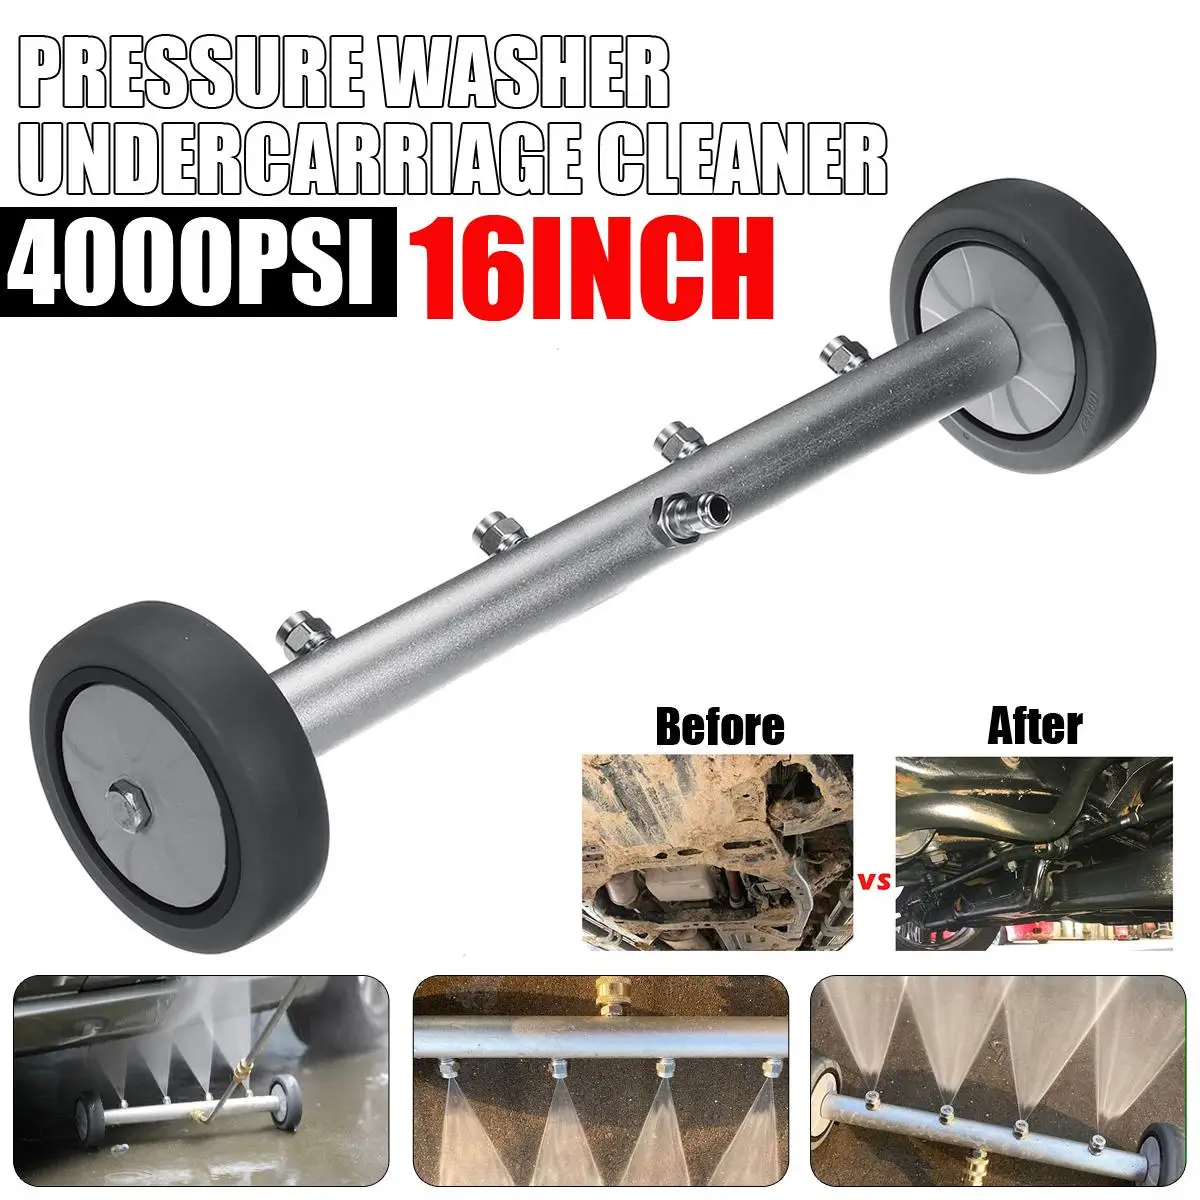 

16 Inch Pressure Washer Undercarriage Cleaner Water Broom 2In1 Power Washer Attachments 1500 PSI-4000 PSI Surface Cleaning Wands